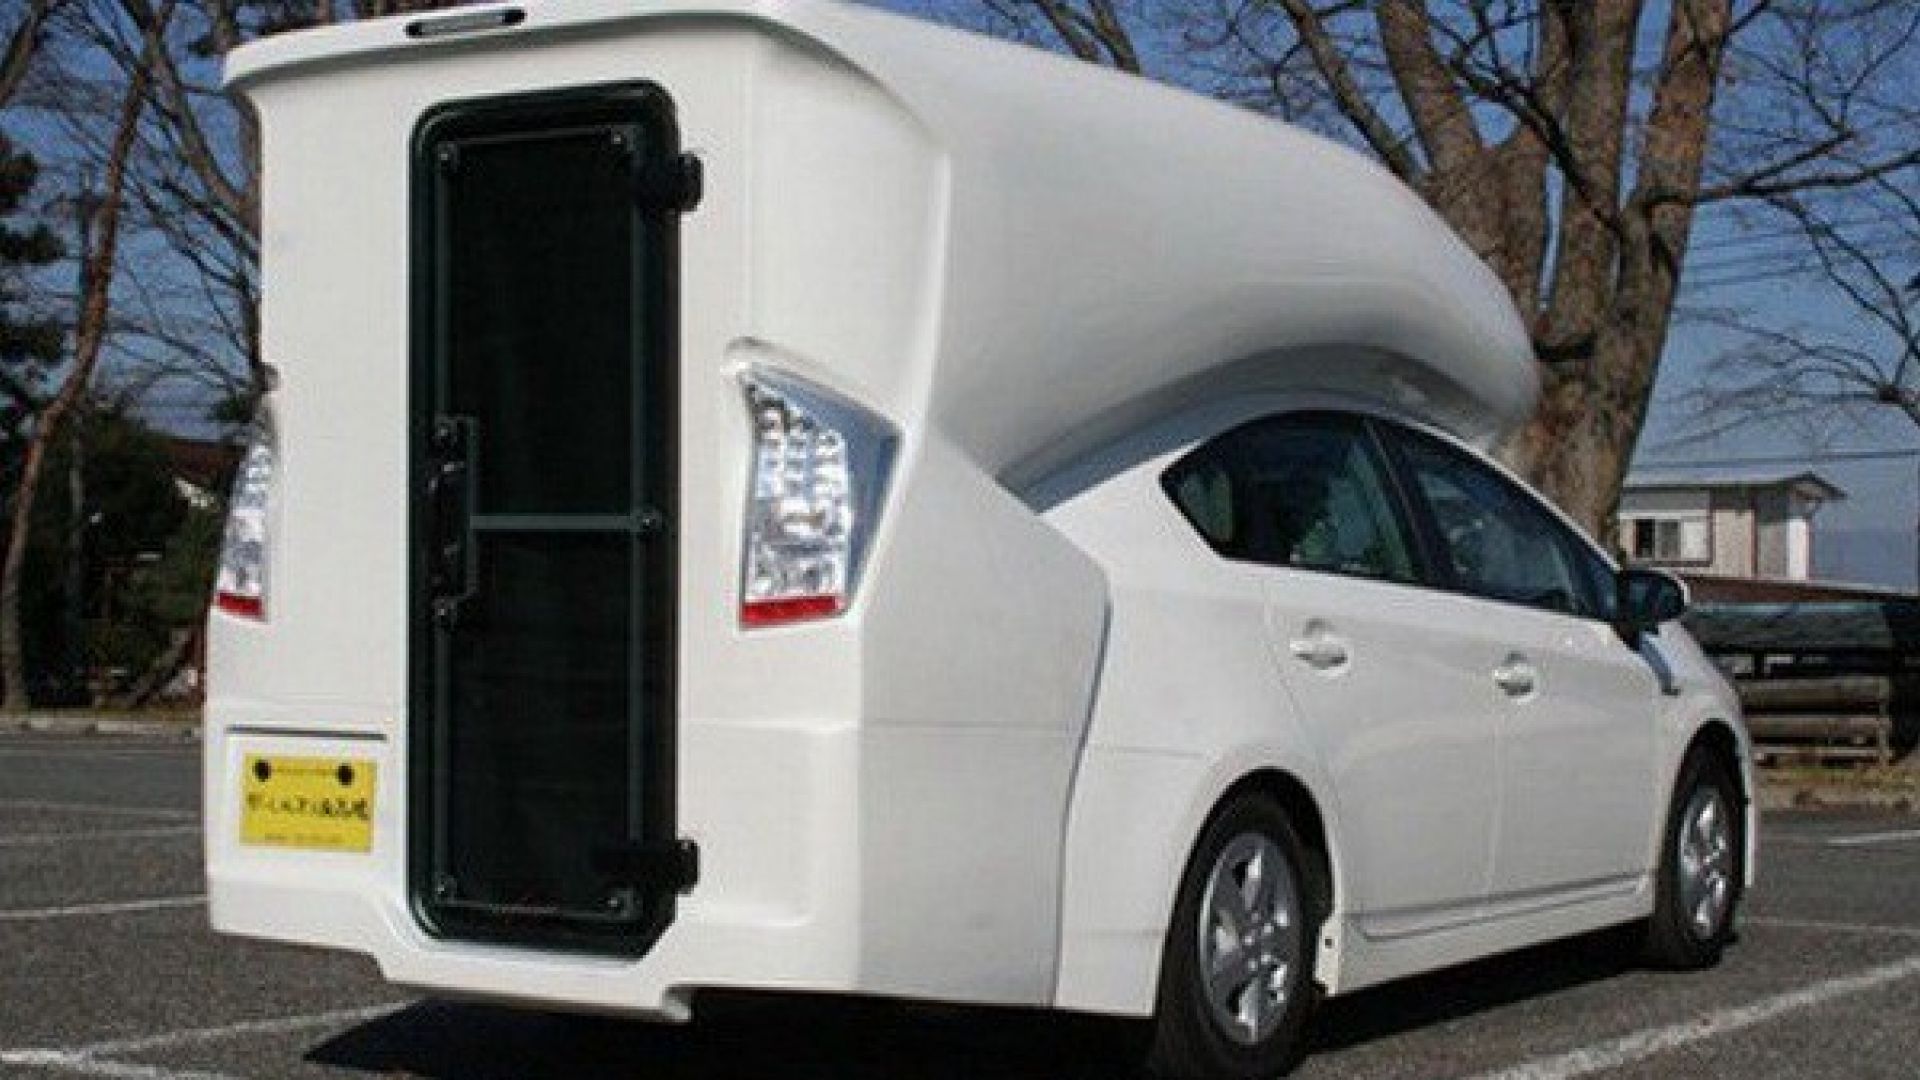 Auto-camper: - Toyota Prius Relax Cabin by Camp-Inn - MotorBox